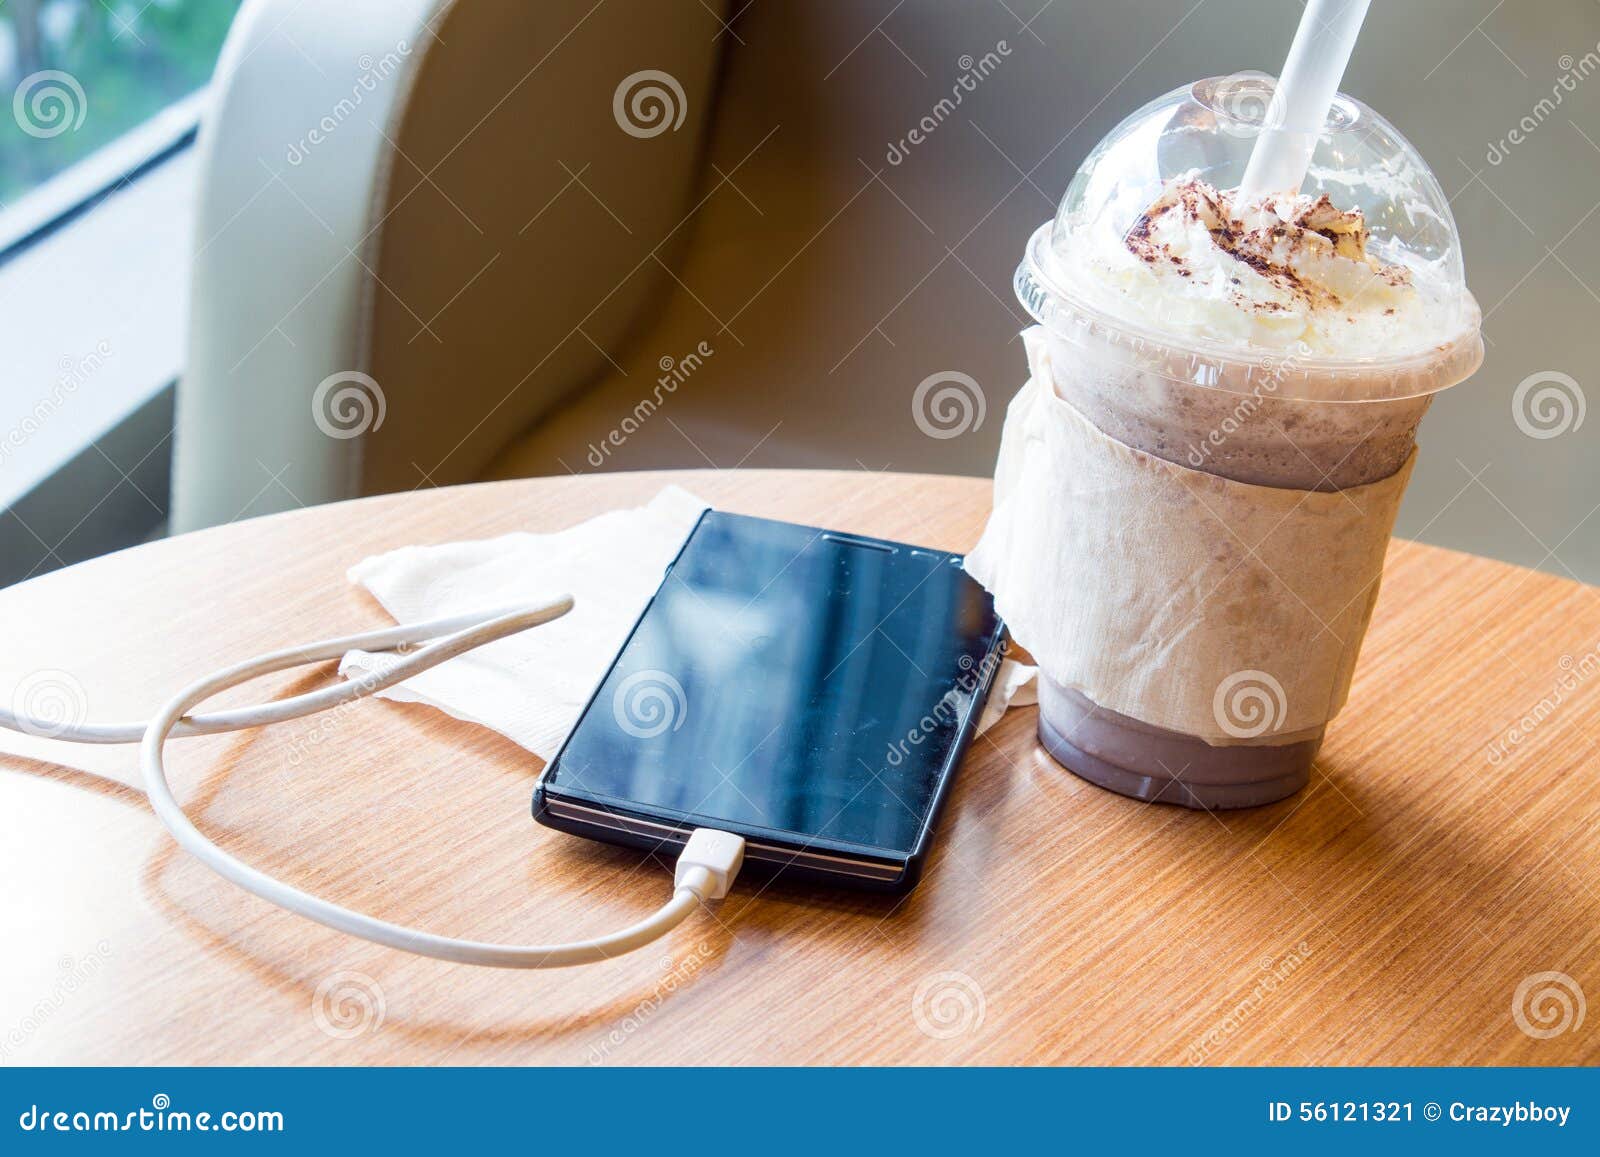 cell phone charging in the cafe with a plastic cup of iced chocolate frappe